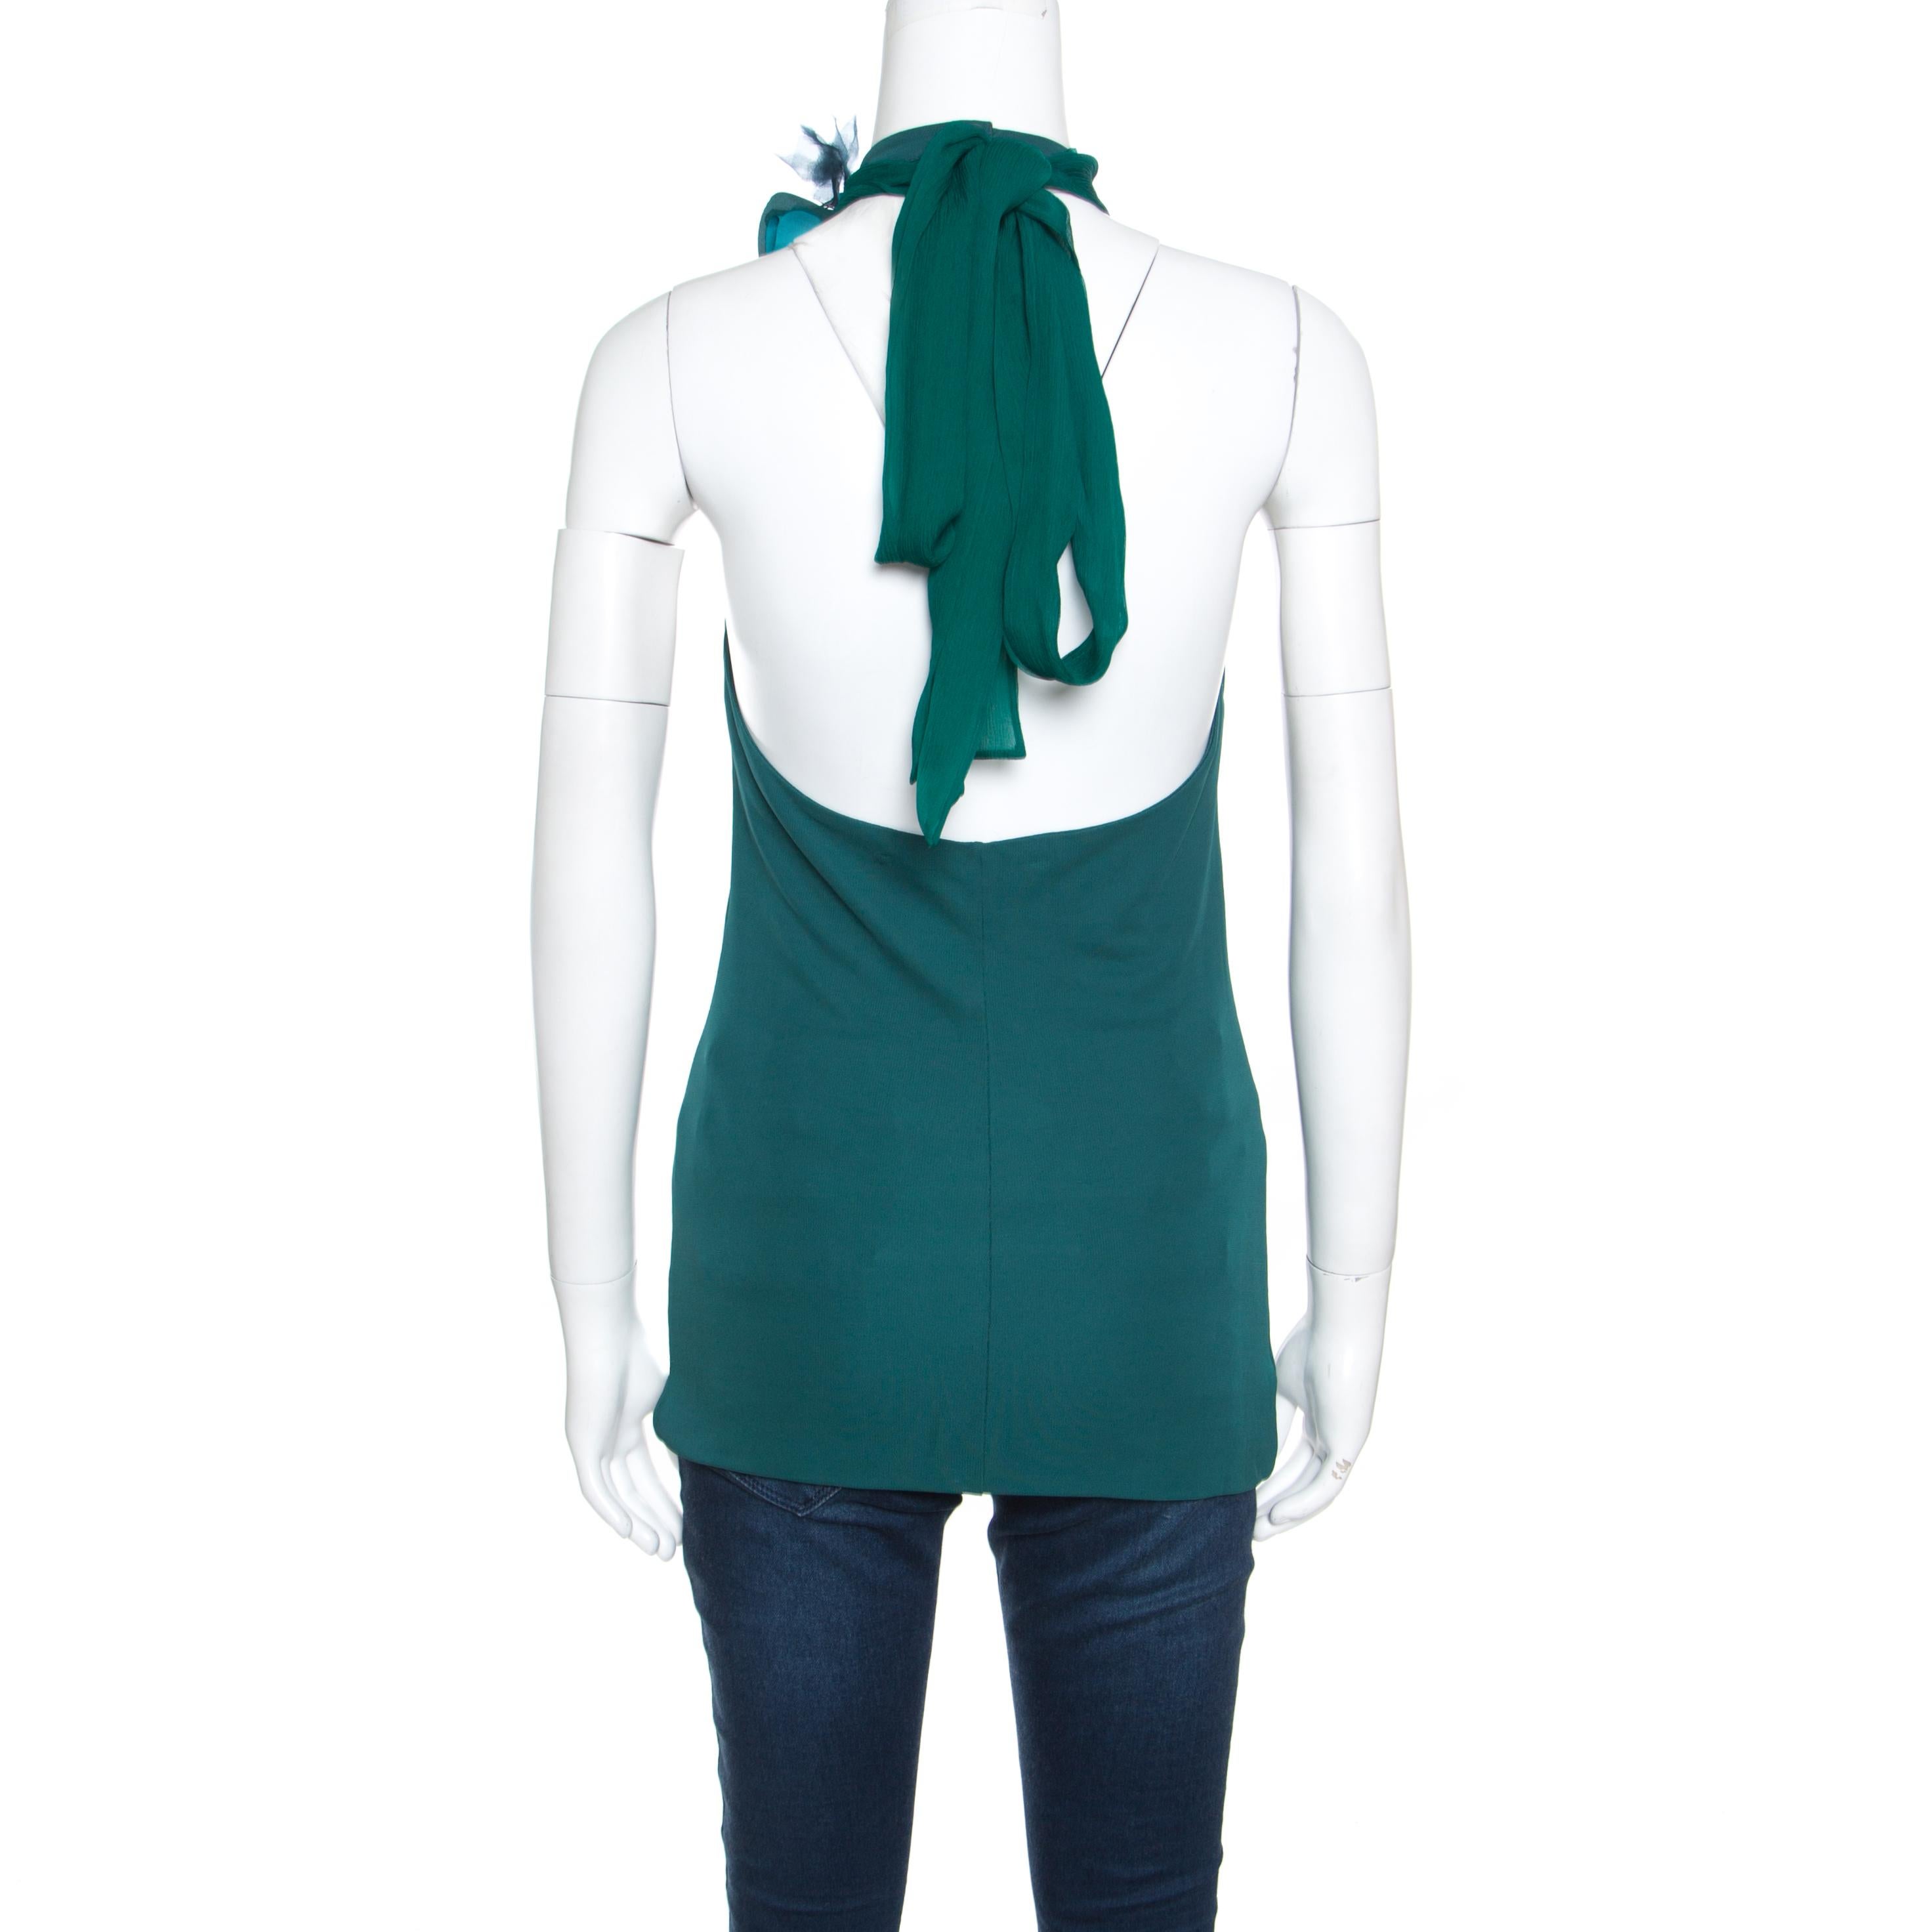 This emerald green top from Gucci is here to make you look fashionably divine. Made from quality fabrics, the top has a halter neckline with an orchid flower applique and a tie at the back. You can wear it with tailored trousers and open toe